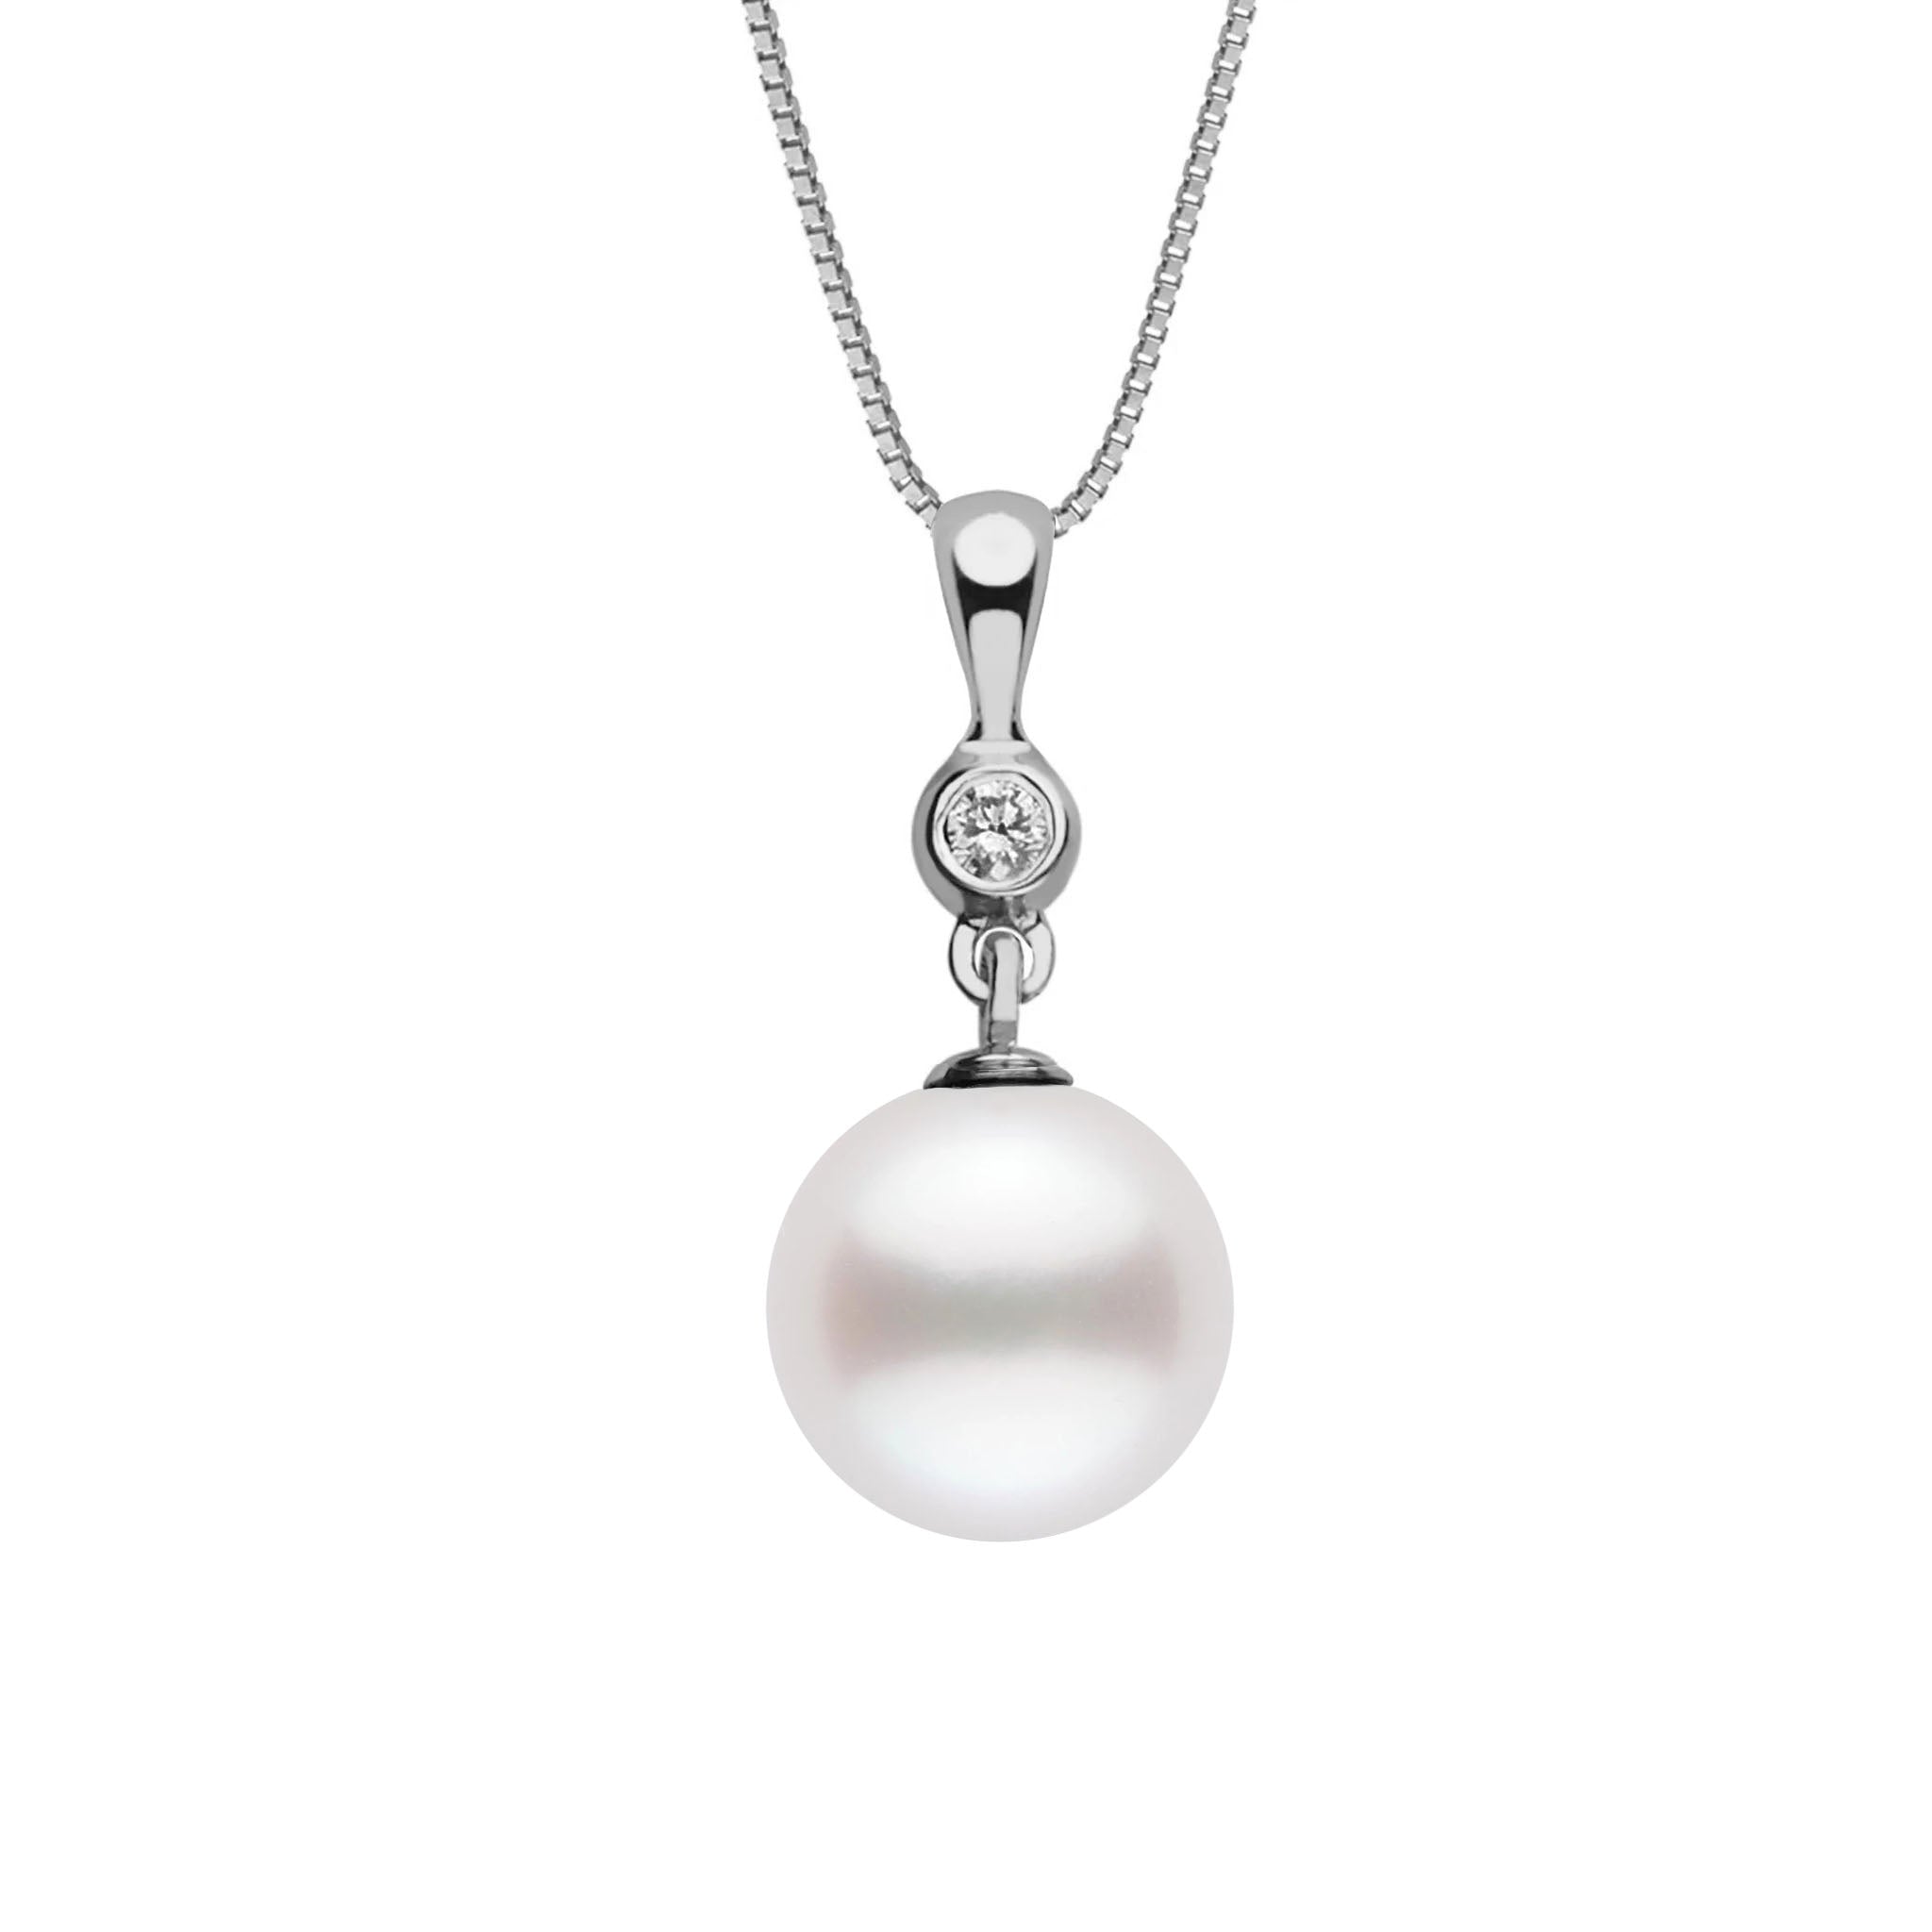 White South Sea Pearl Information